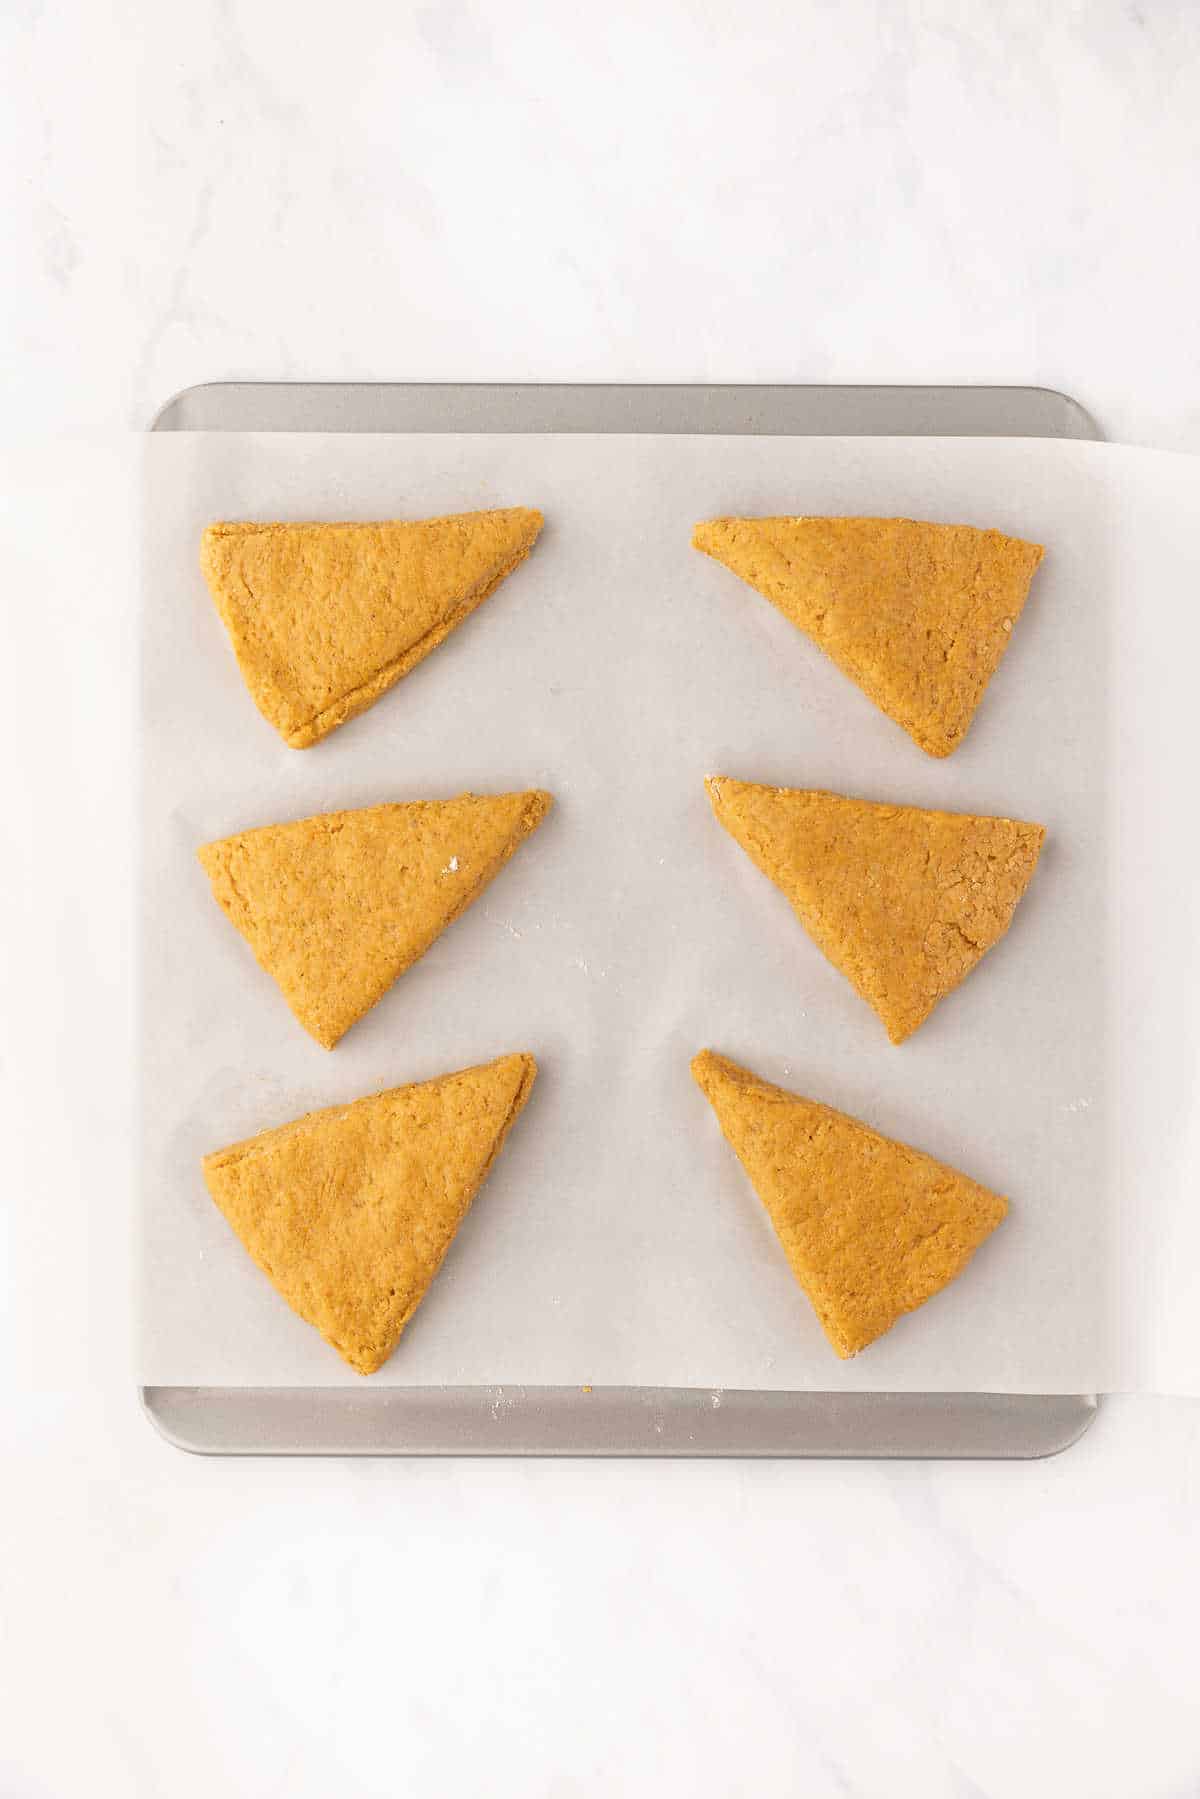 Six unbaked pumpkin scones on a parchment lined baking sheet. 